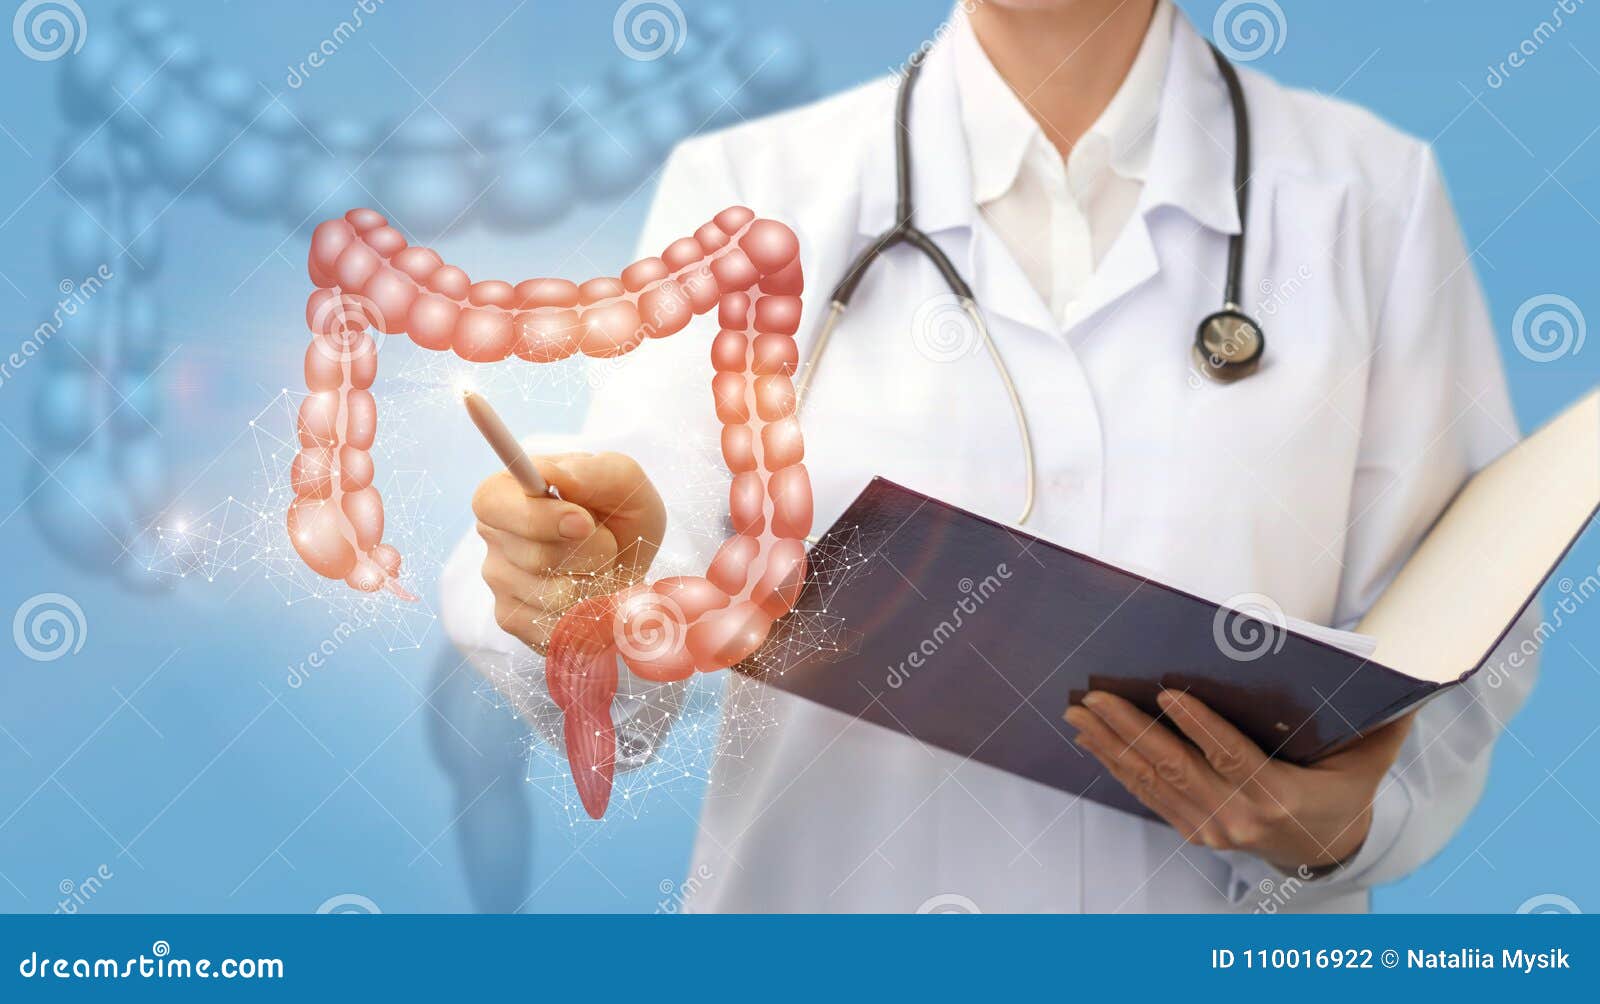 doctor shows colon .